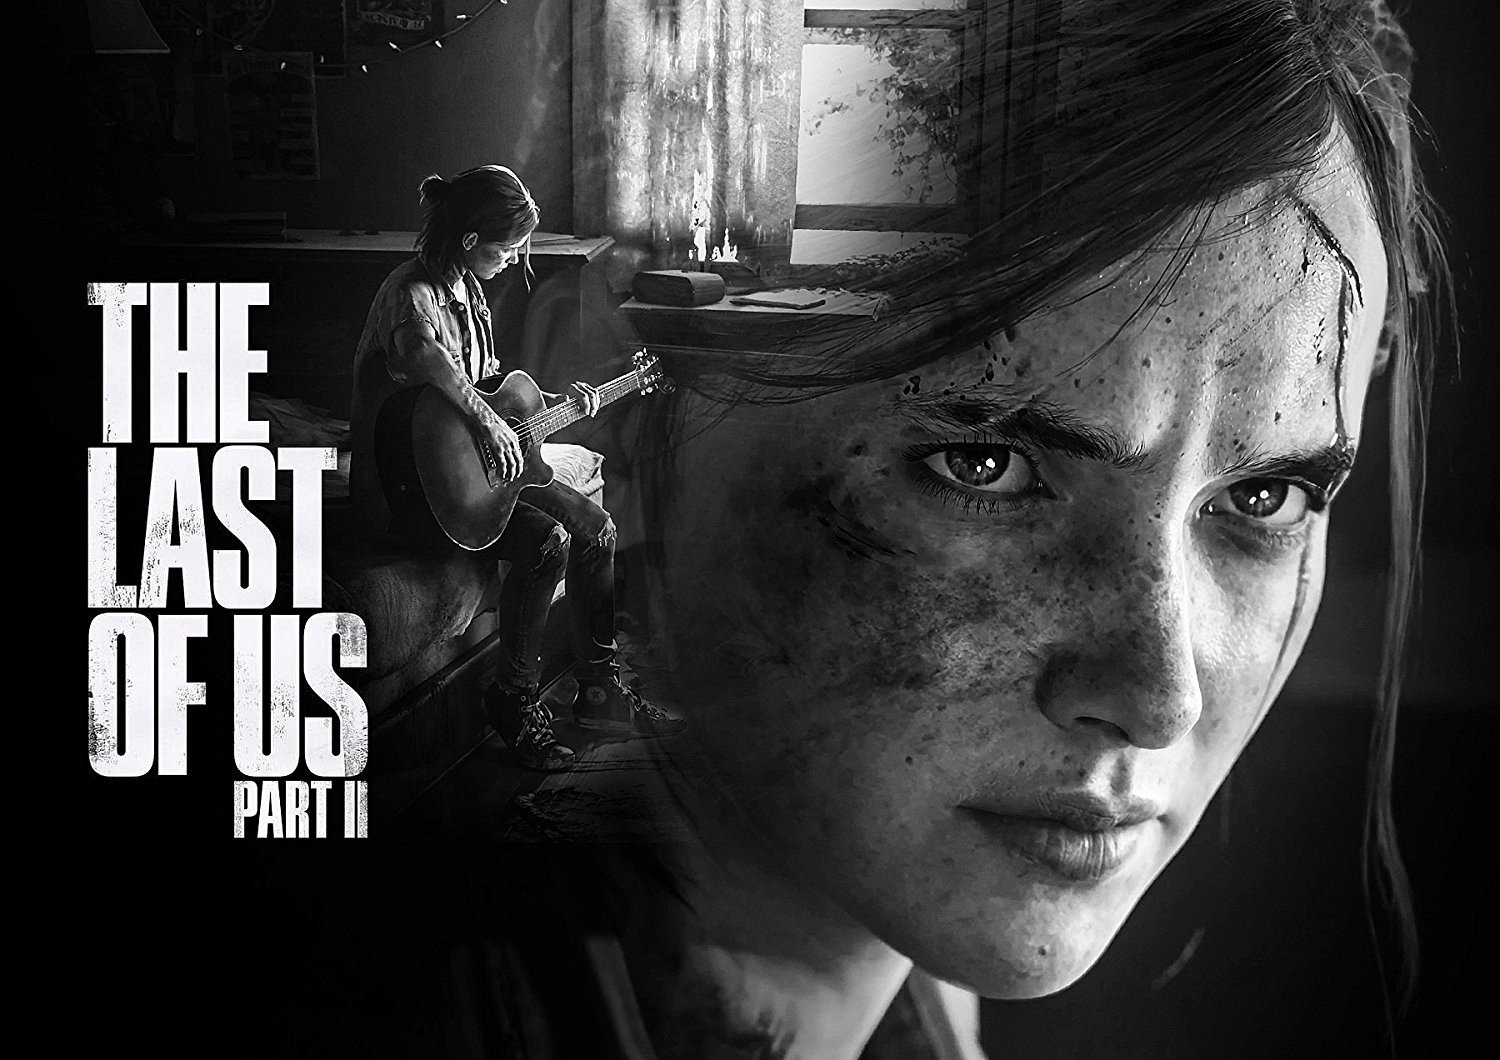 Metacritic Has Changed Its User Review System After The Last Of Us Part II  Review Bombing